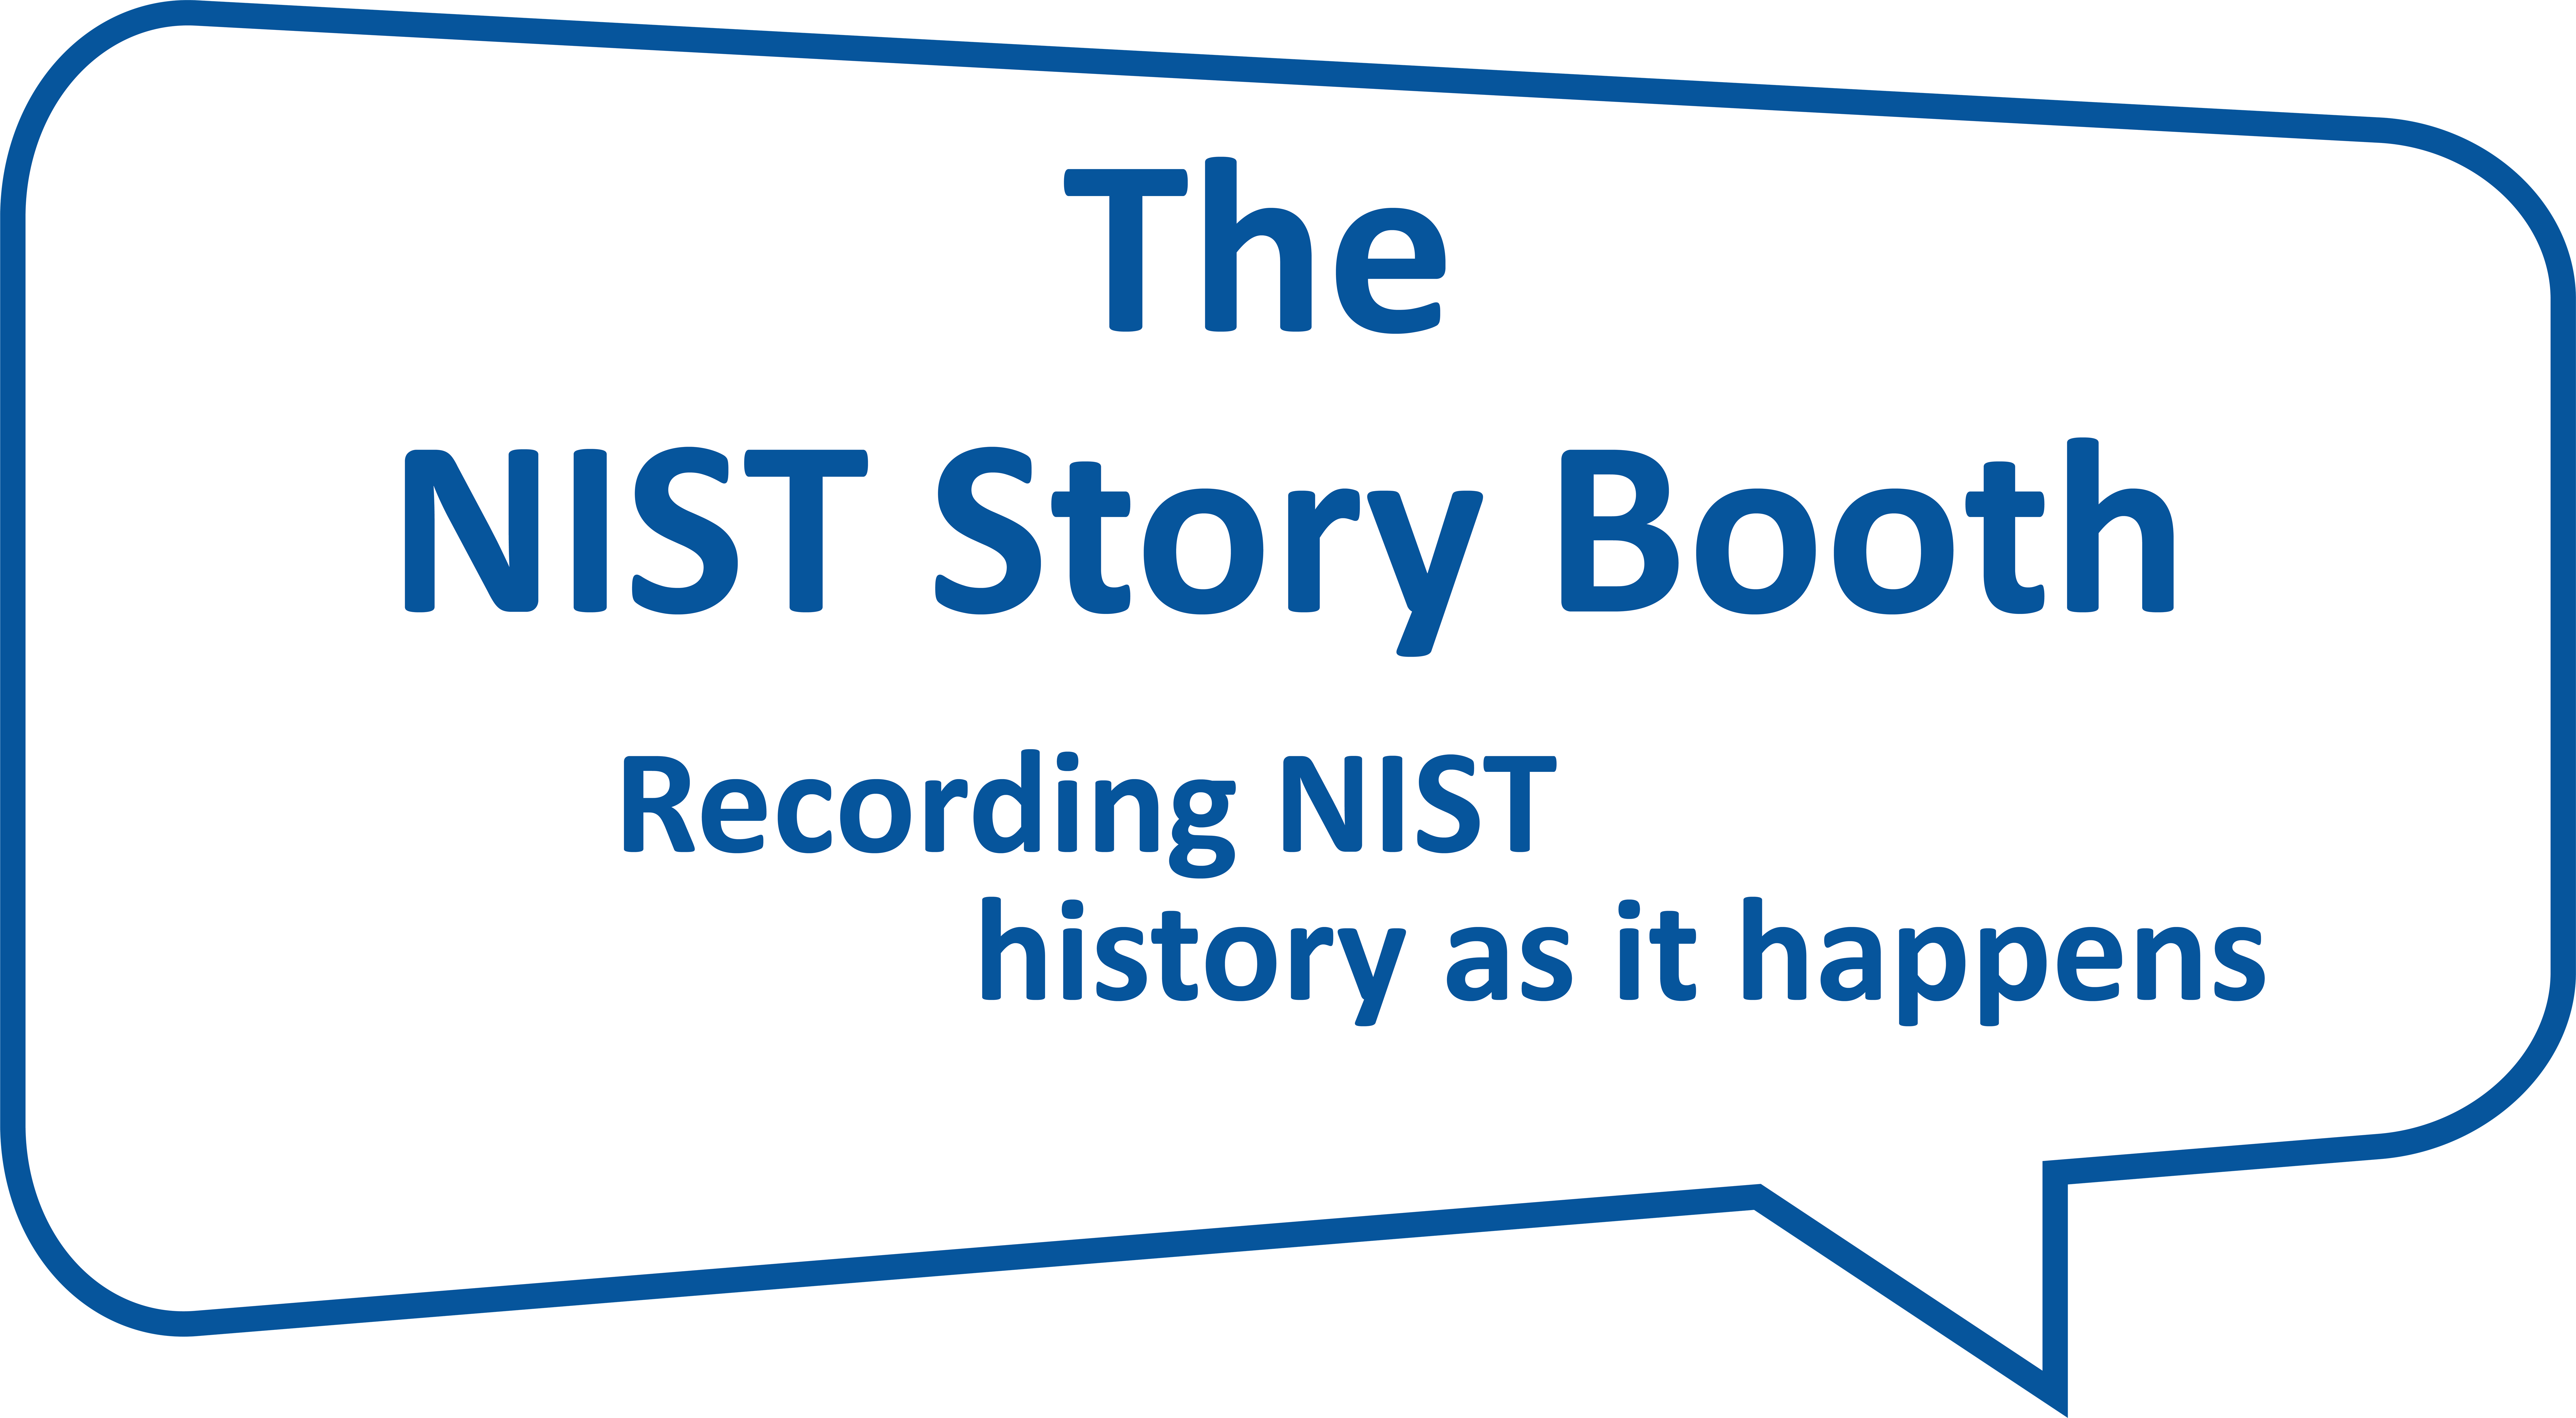 The NIST Story Booth logo